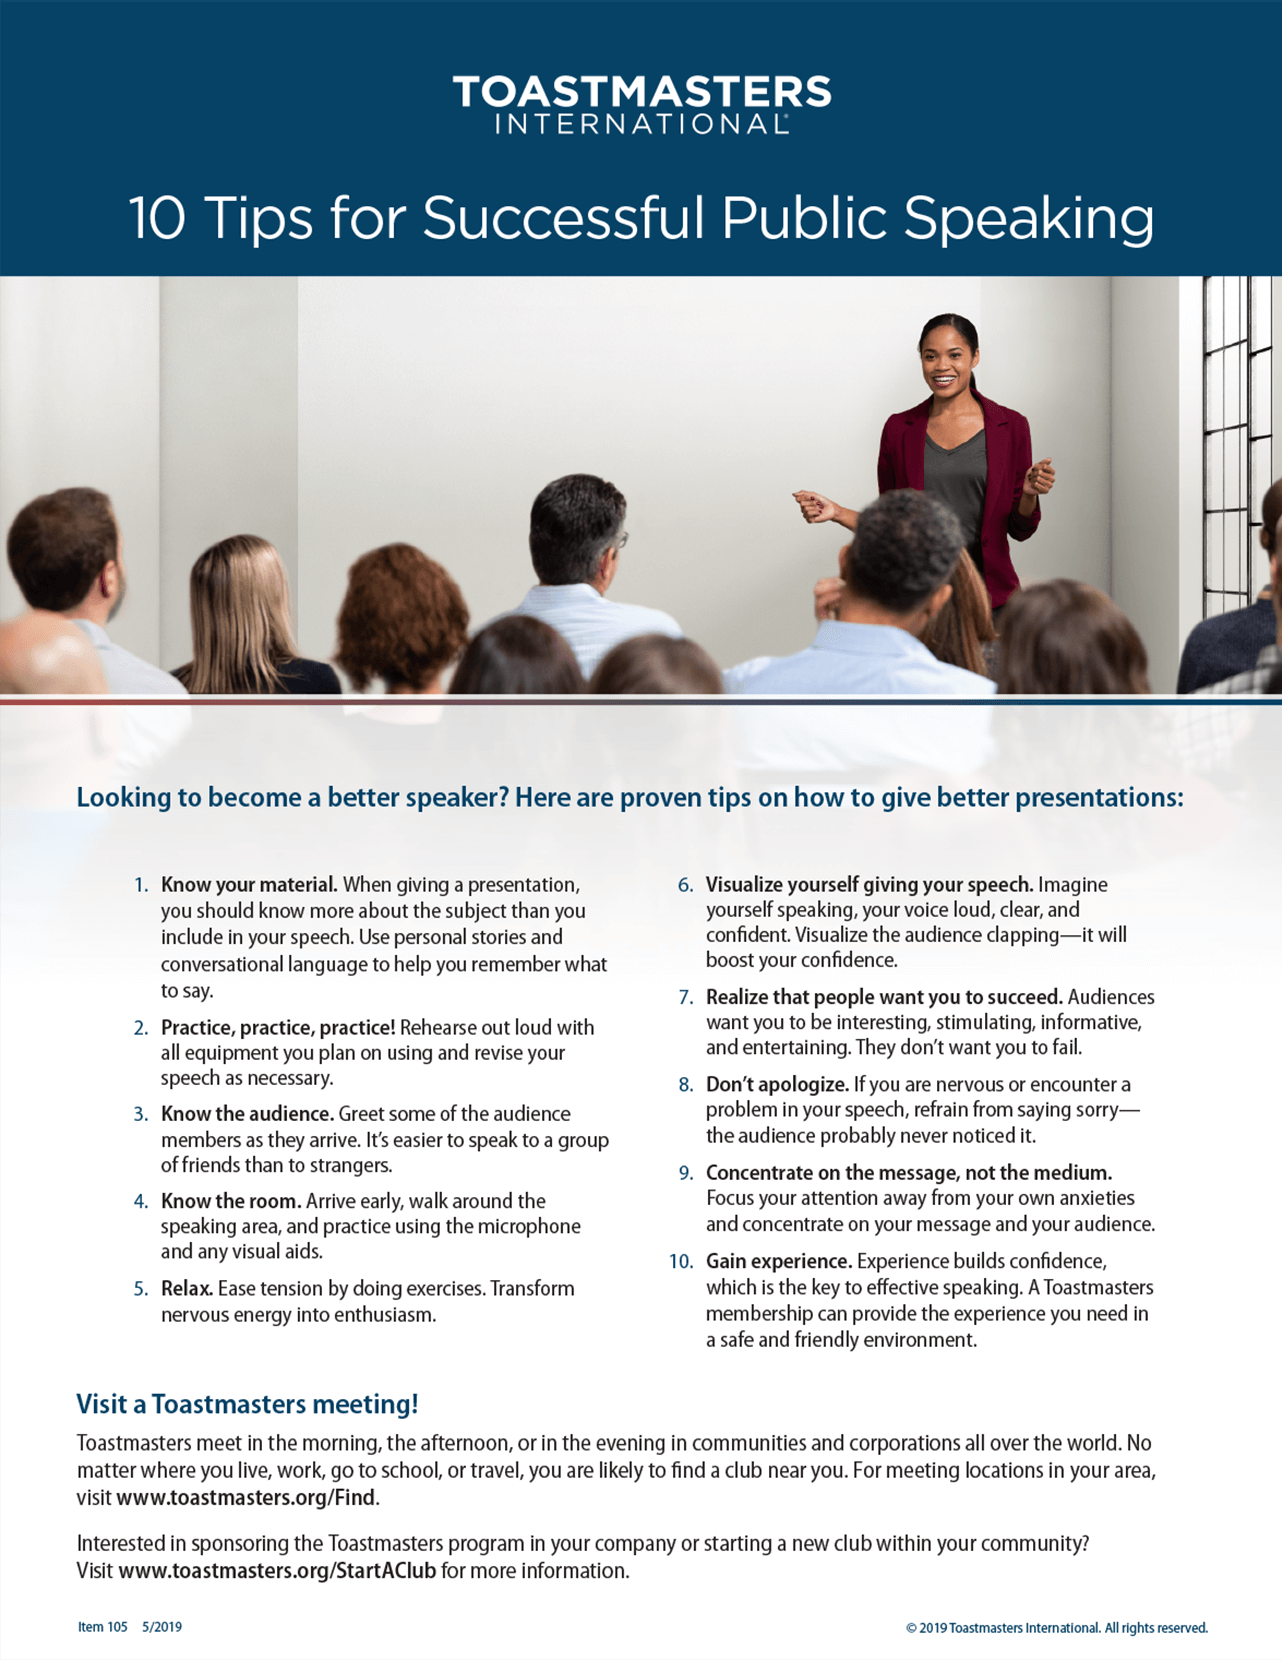 how to give a successful public speech